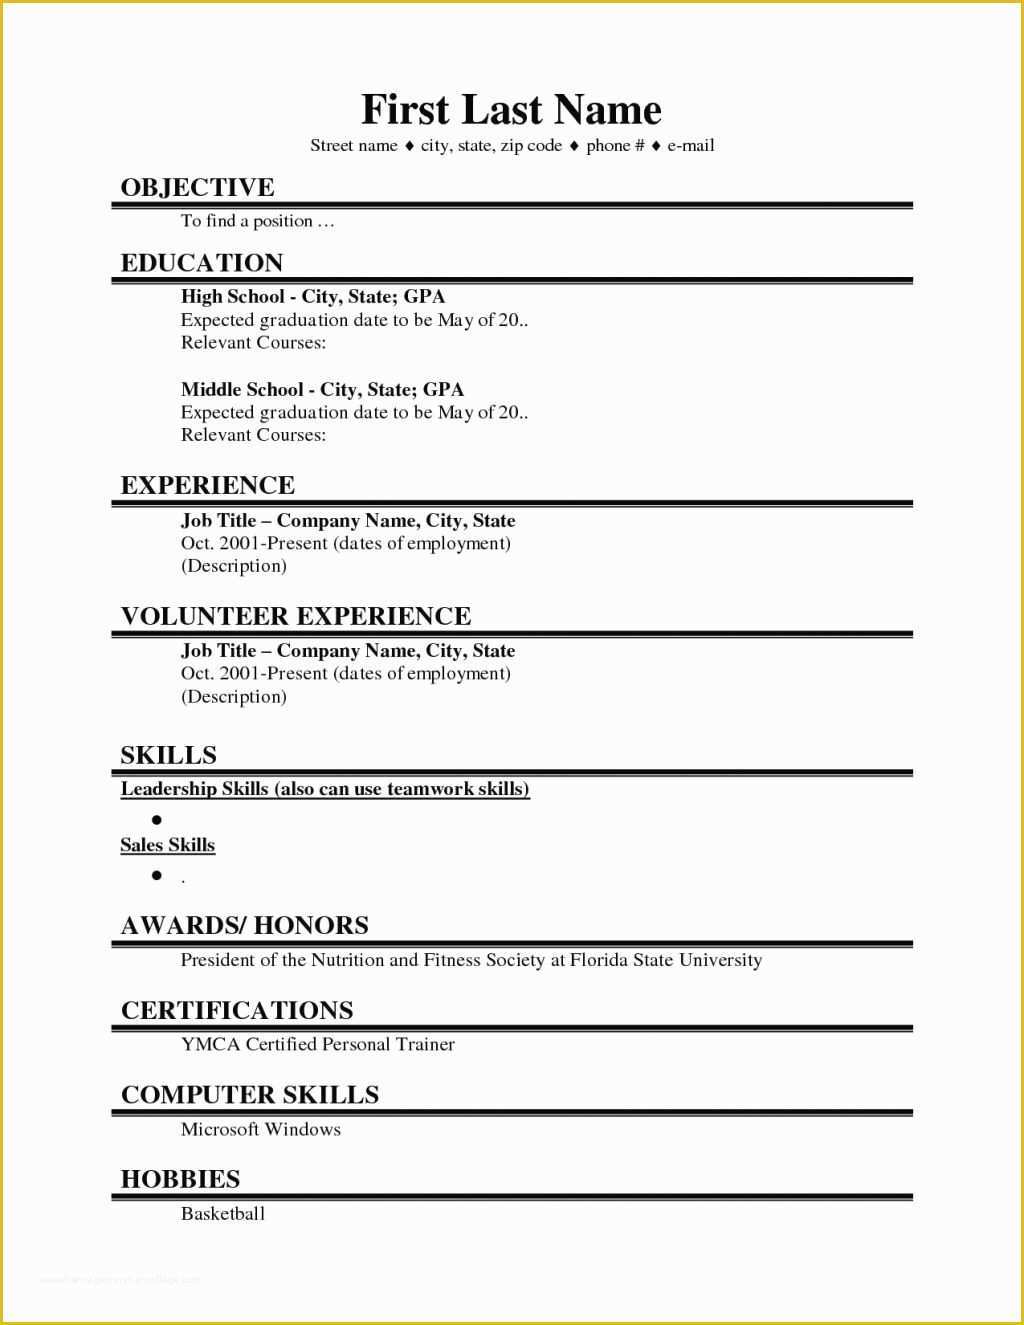 Resume Template for Google Docs Free Of Resume and Template 64 Fantastic Free Resume Templates